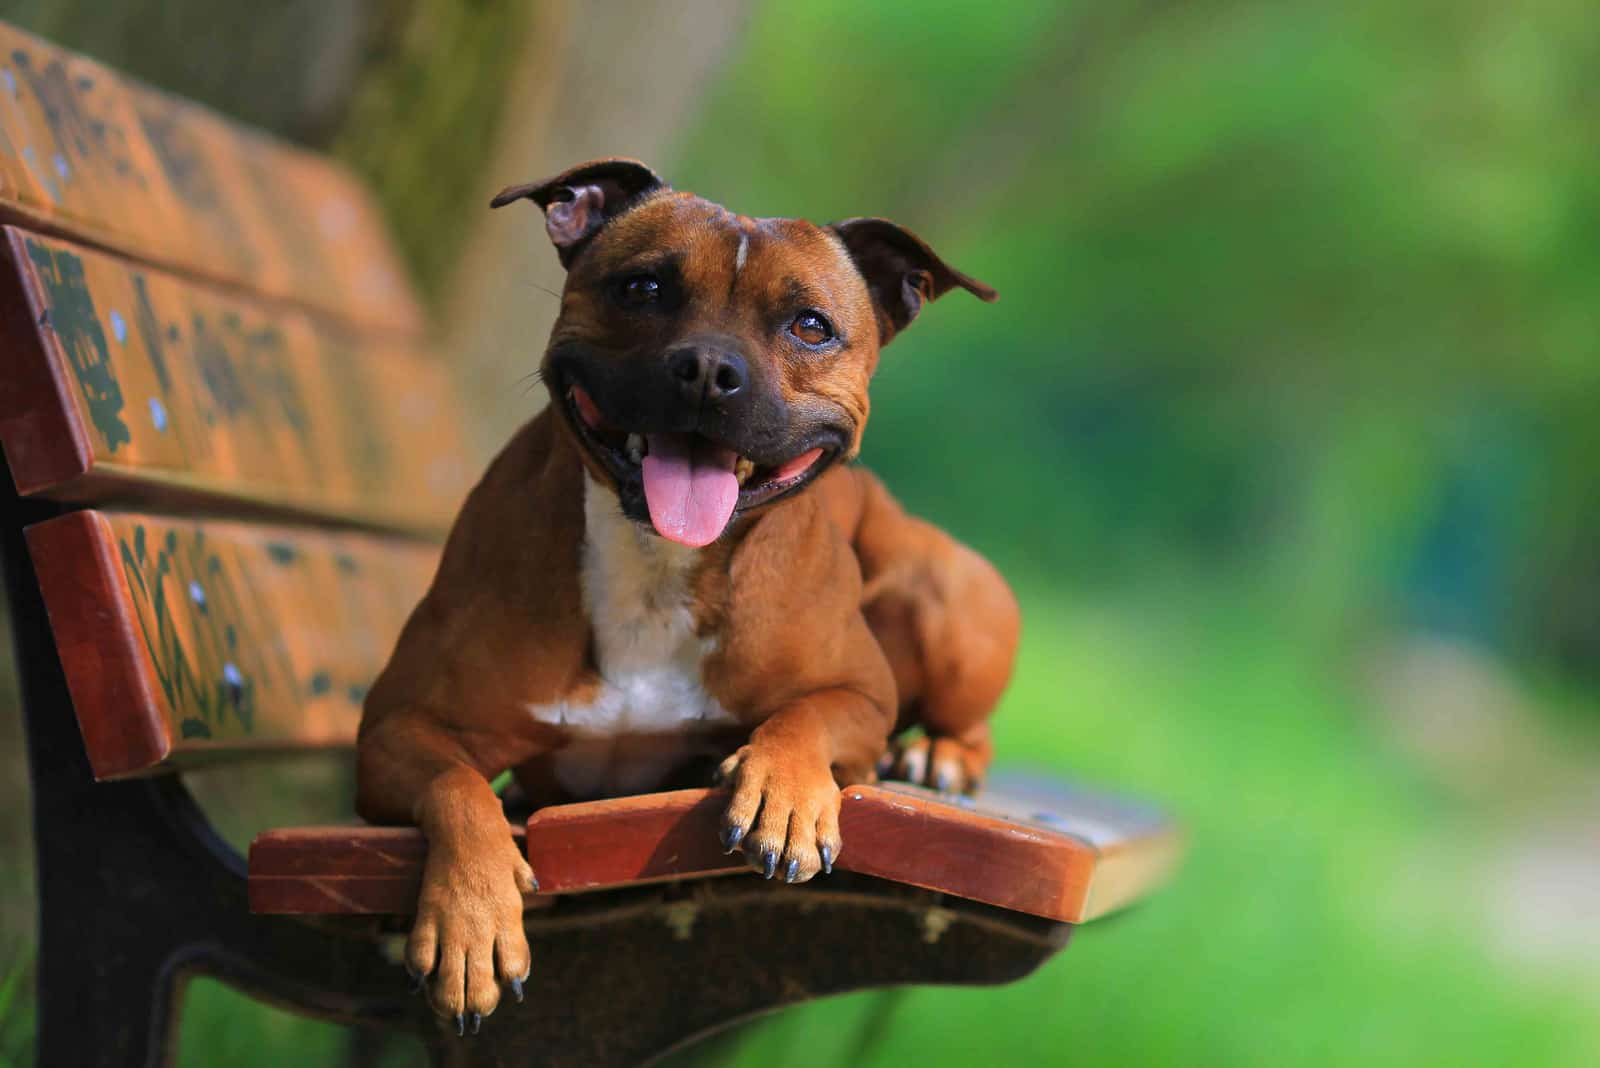 The Staffordshire Bull Terrier lies on a bench